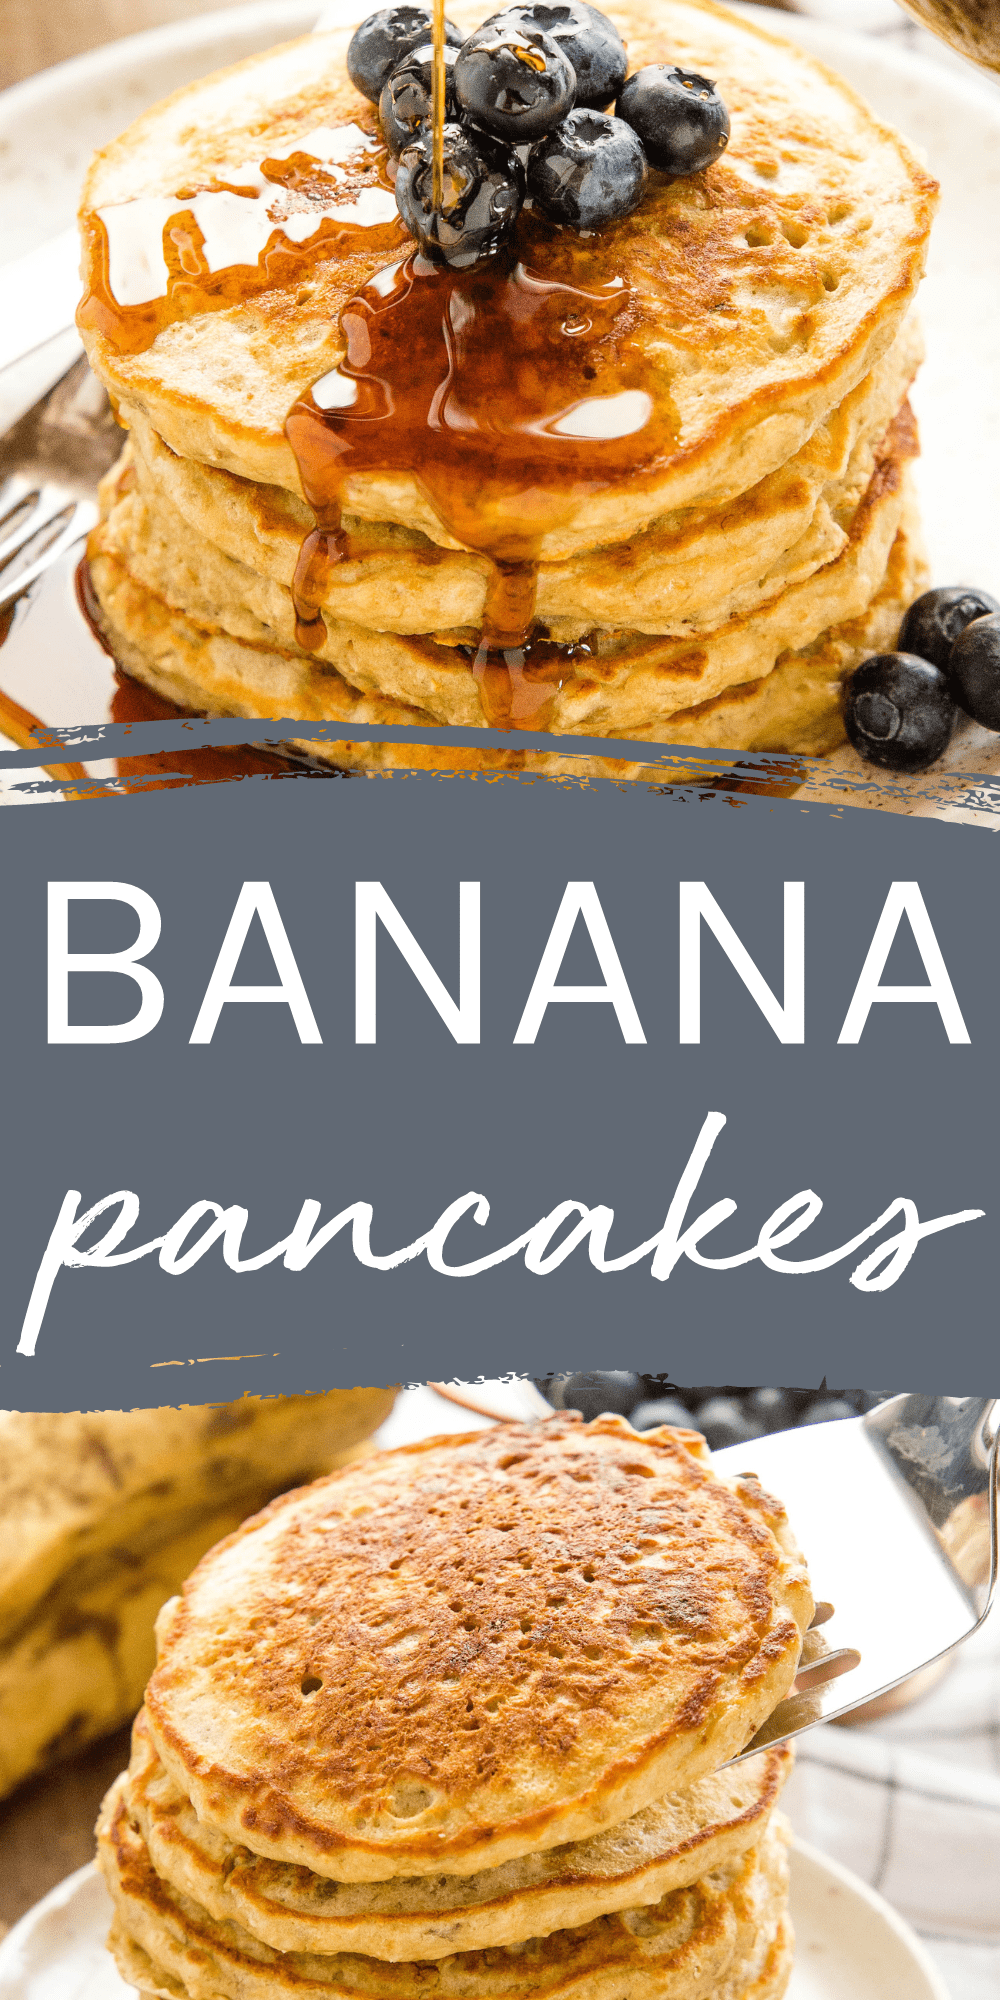 This Banana Pancakes Recipe is the best healthy breakfast made with whole grain oats and mashed bananas. Crispy and golden on the outside and fluffy on the inside. Ready in minutes and perfect for meal prep! Recipe from thebusybaker.ca! #bananapancakes #easybananapancakes #easypancakerecipe #bananapancakerecipe #healthypancakes #healthy #easybreakfast #breakfastrecipe via @busybakerblog